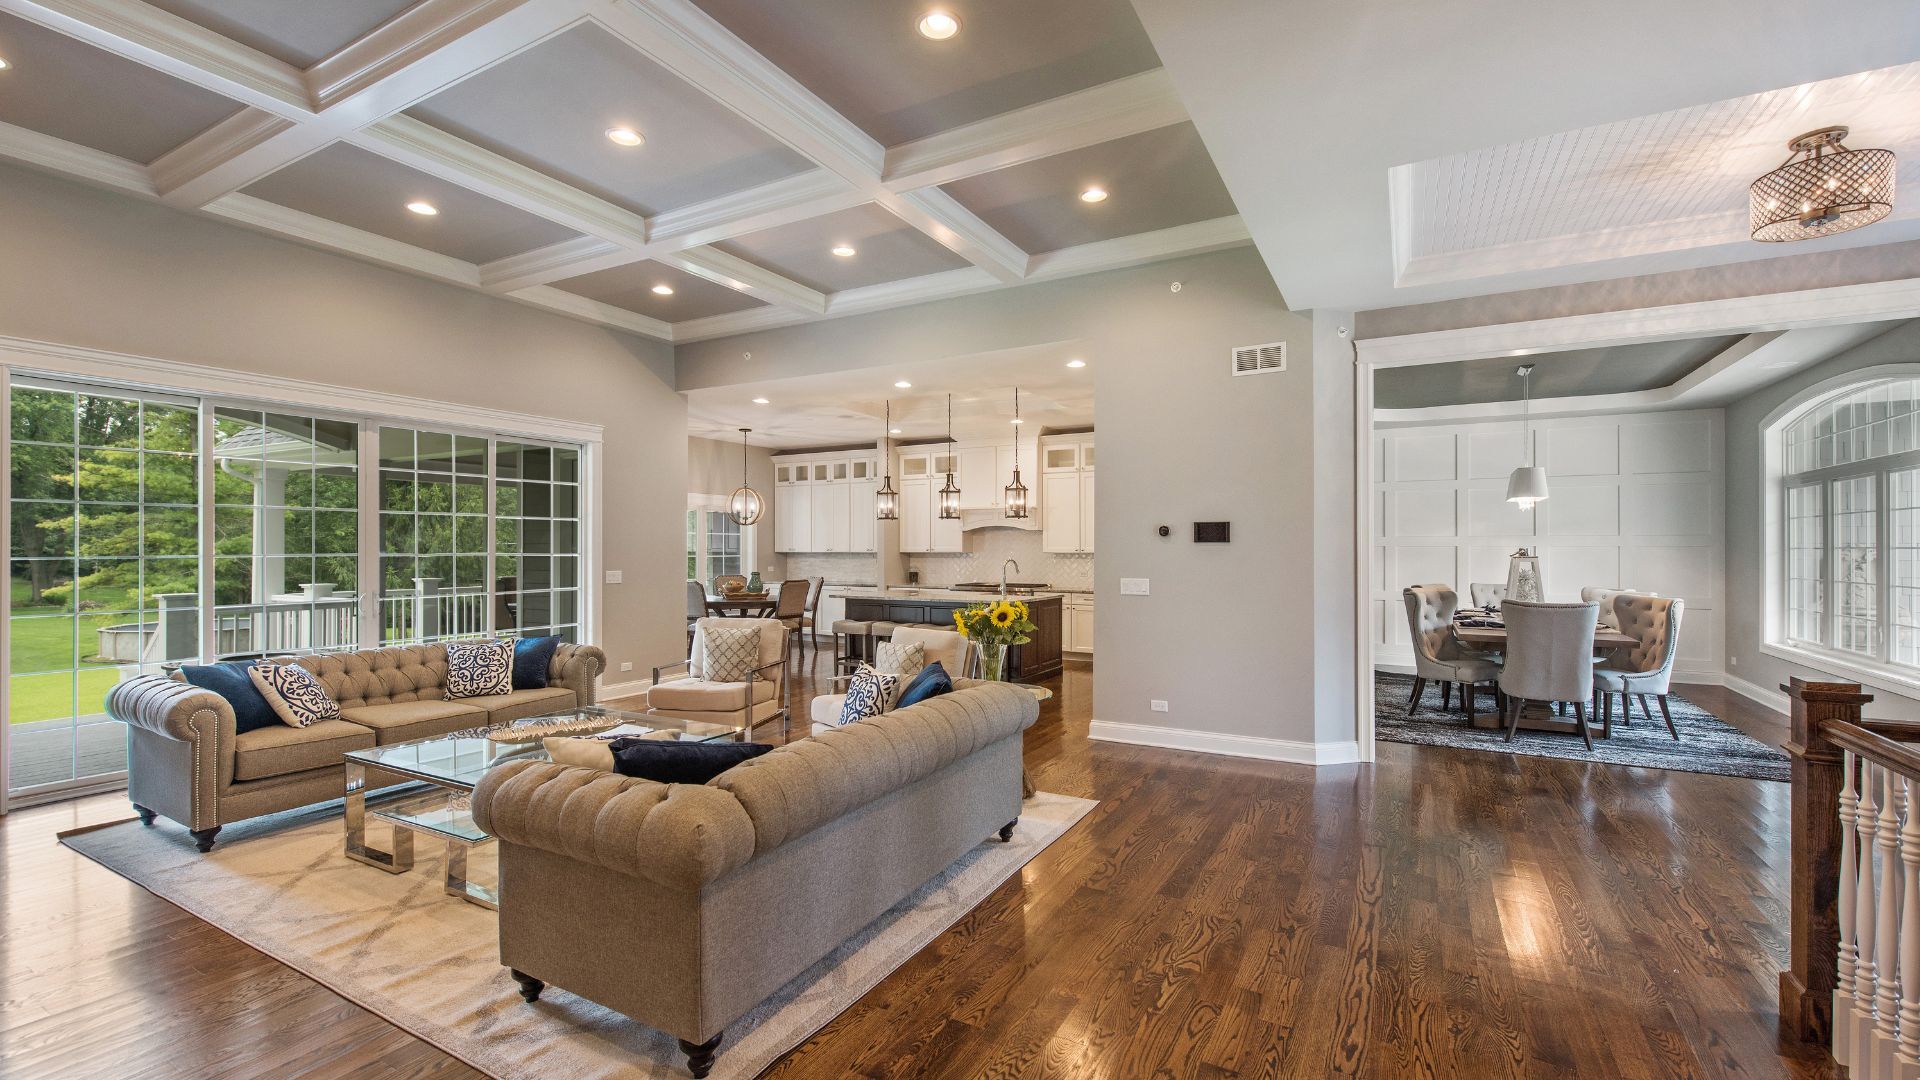 Elegant living room with dark hardwood floors, plush sofas, and a coffered ceiling.